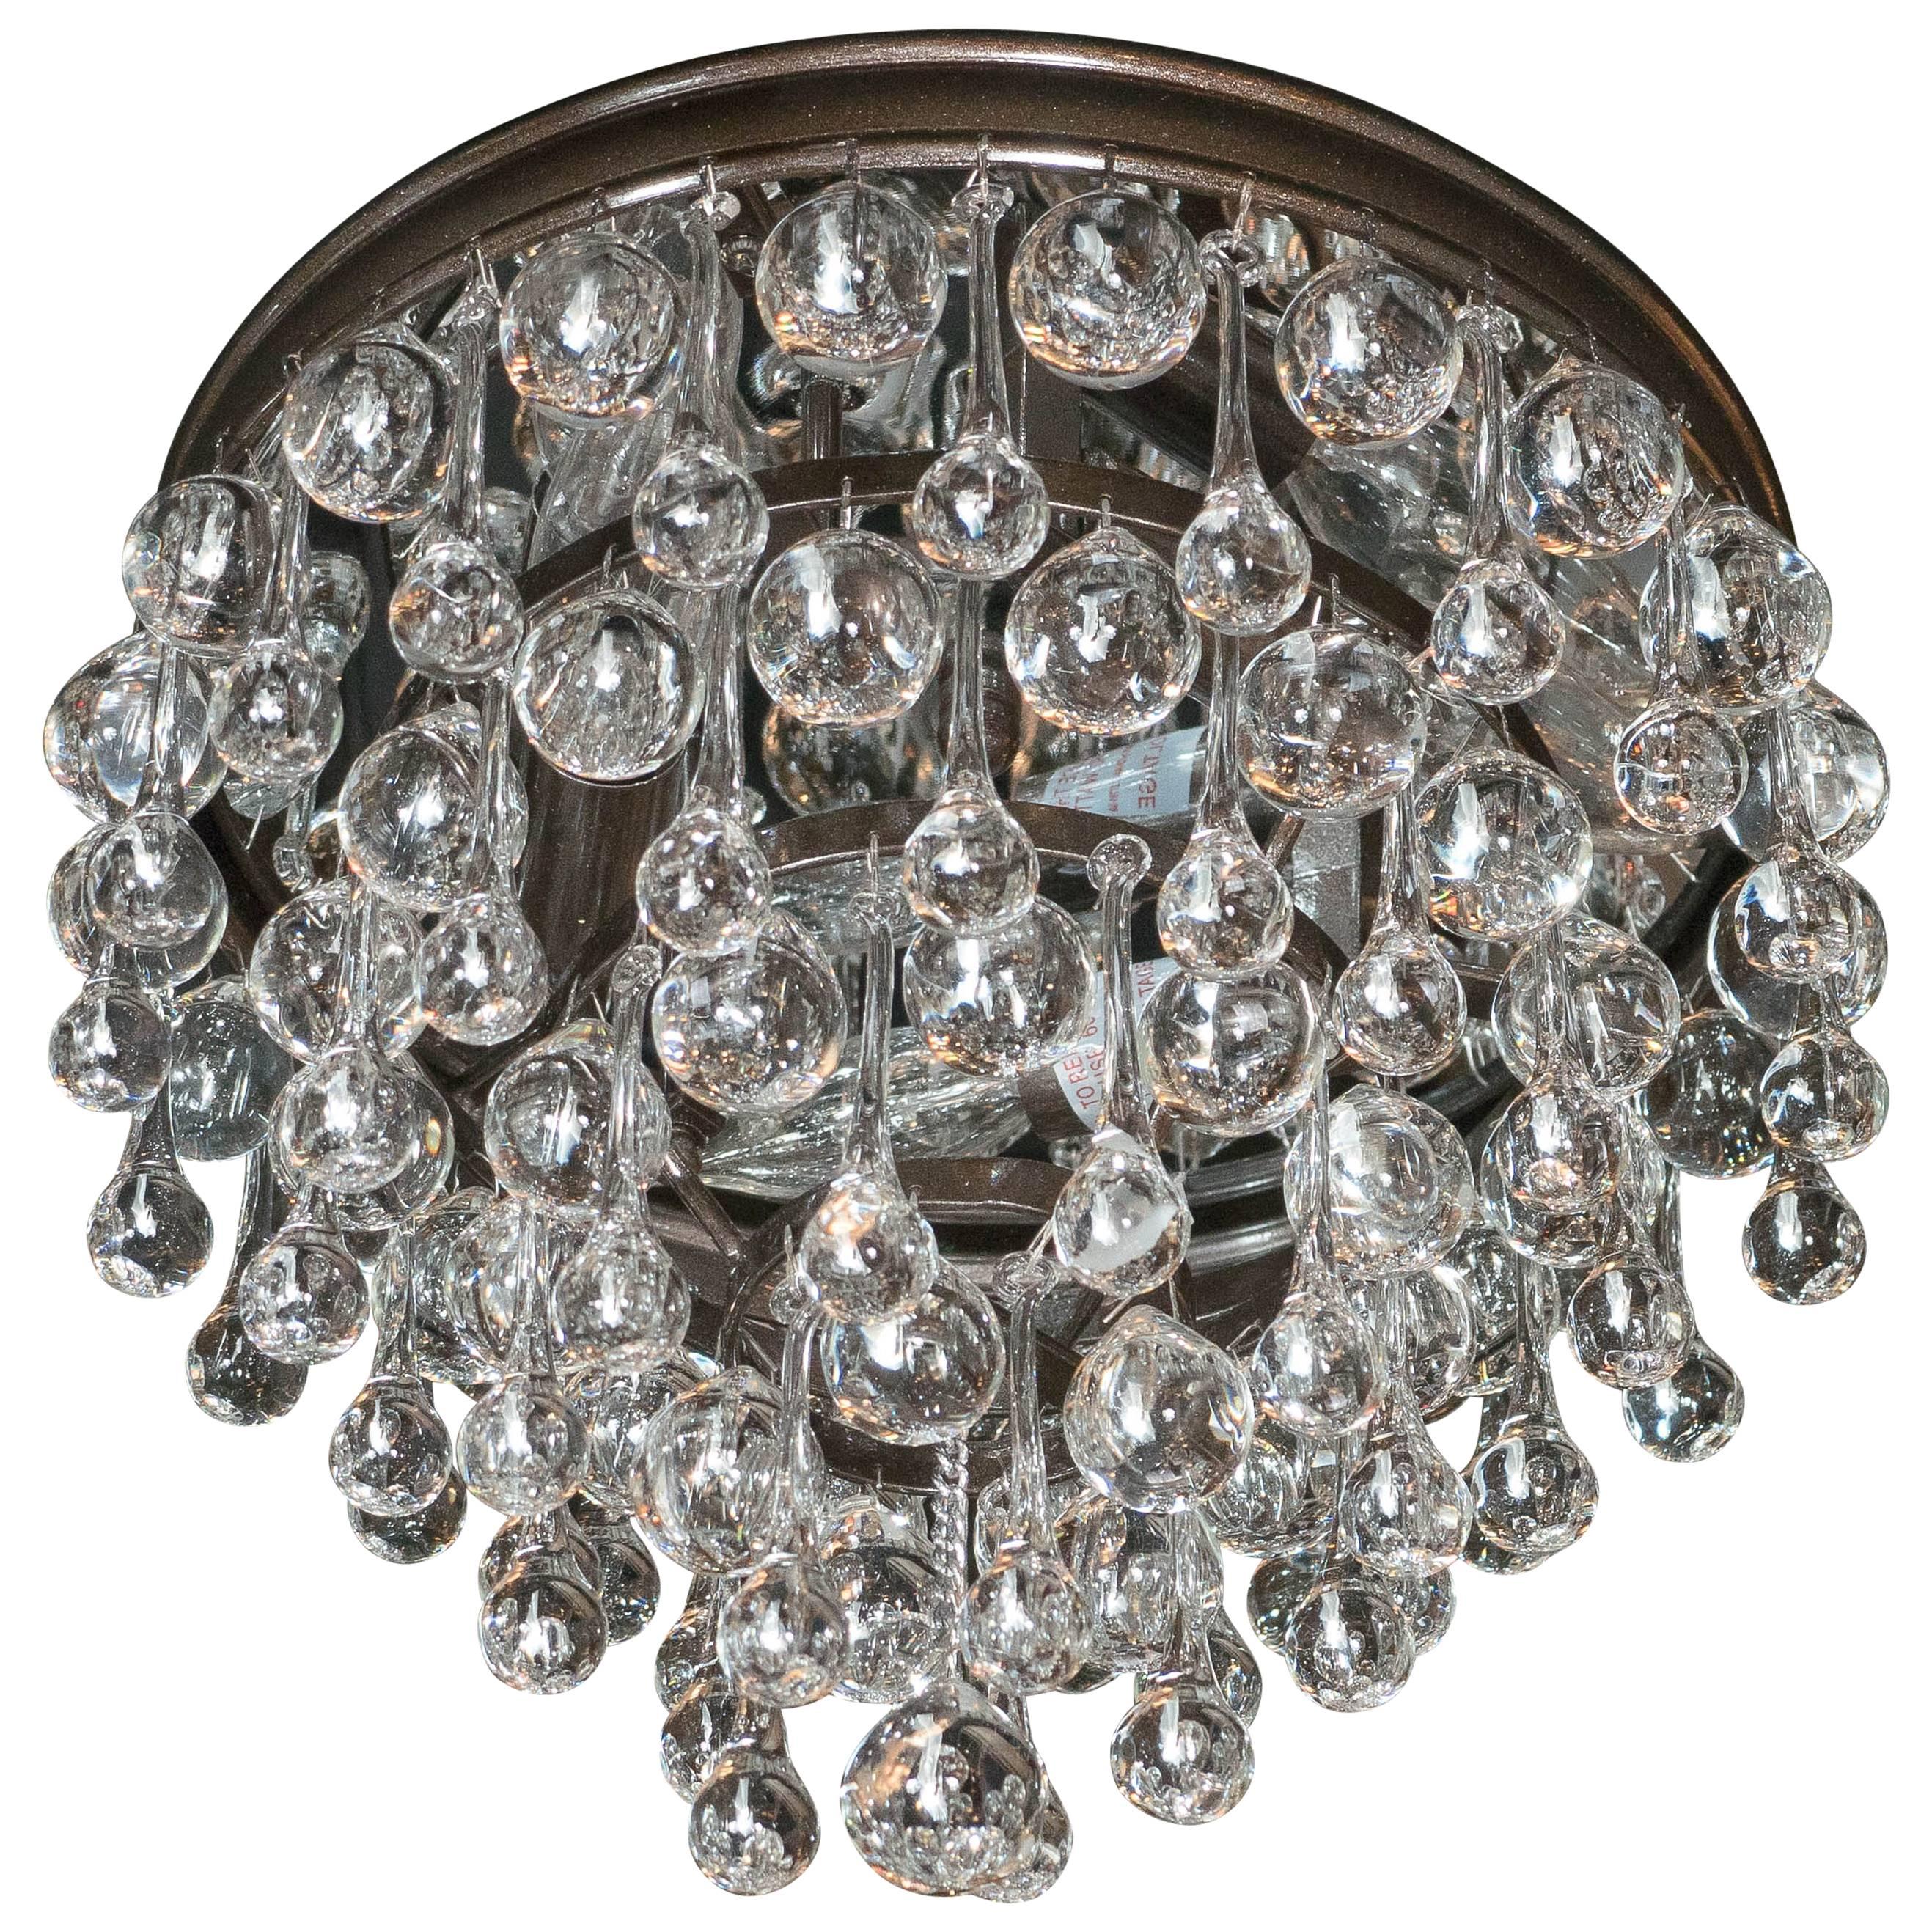 Hollywood Teardrop and Crystal Ball Chandelier with Chrome and Handblown Glass